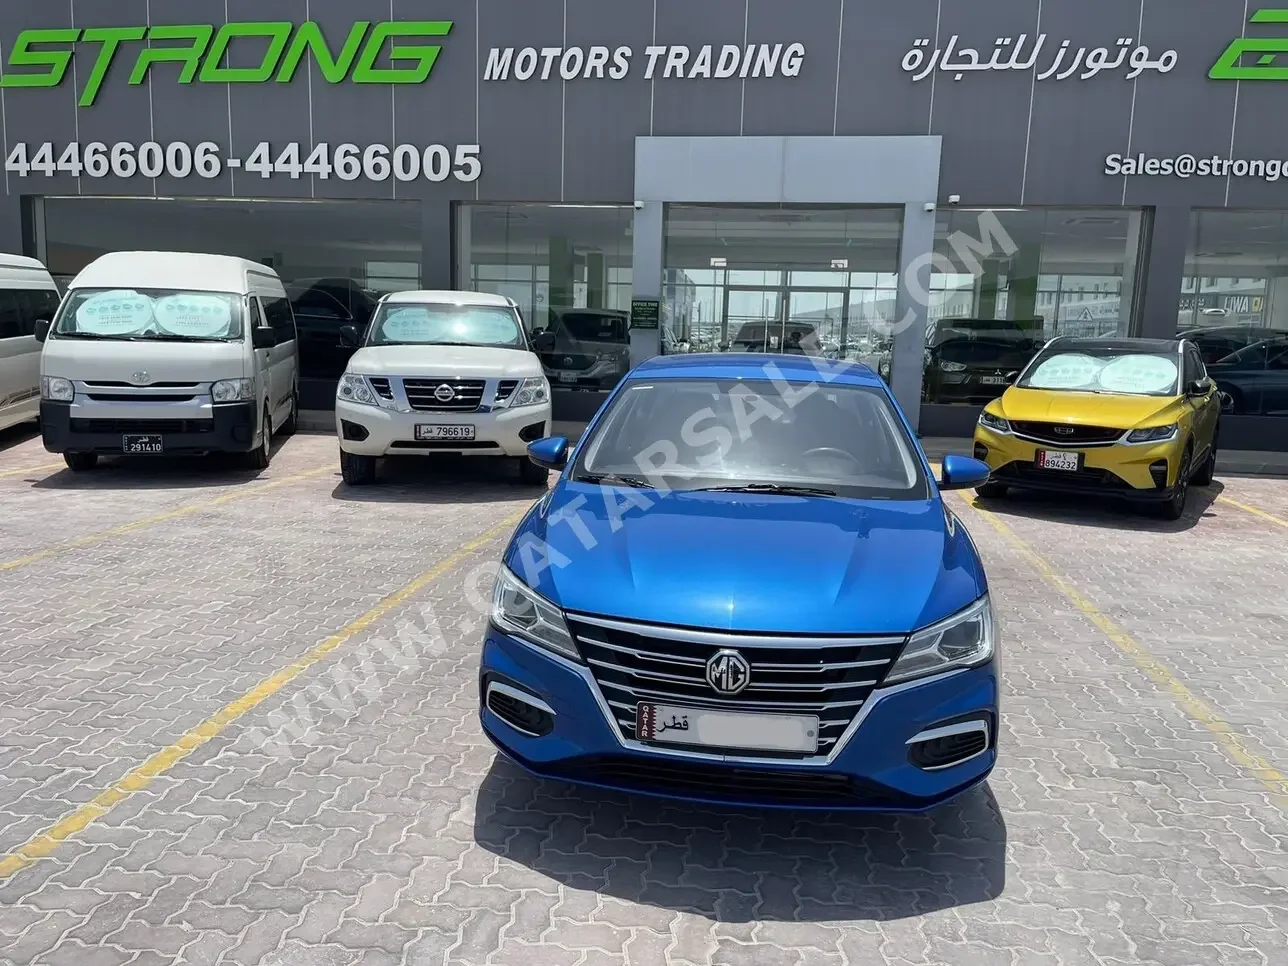 MG  5  2020  Automatic  35,000 Km  4 Cylinder  Front Wheel Drive (FWD)  Sedan  Blue  With Warranty